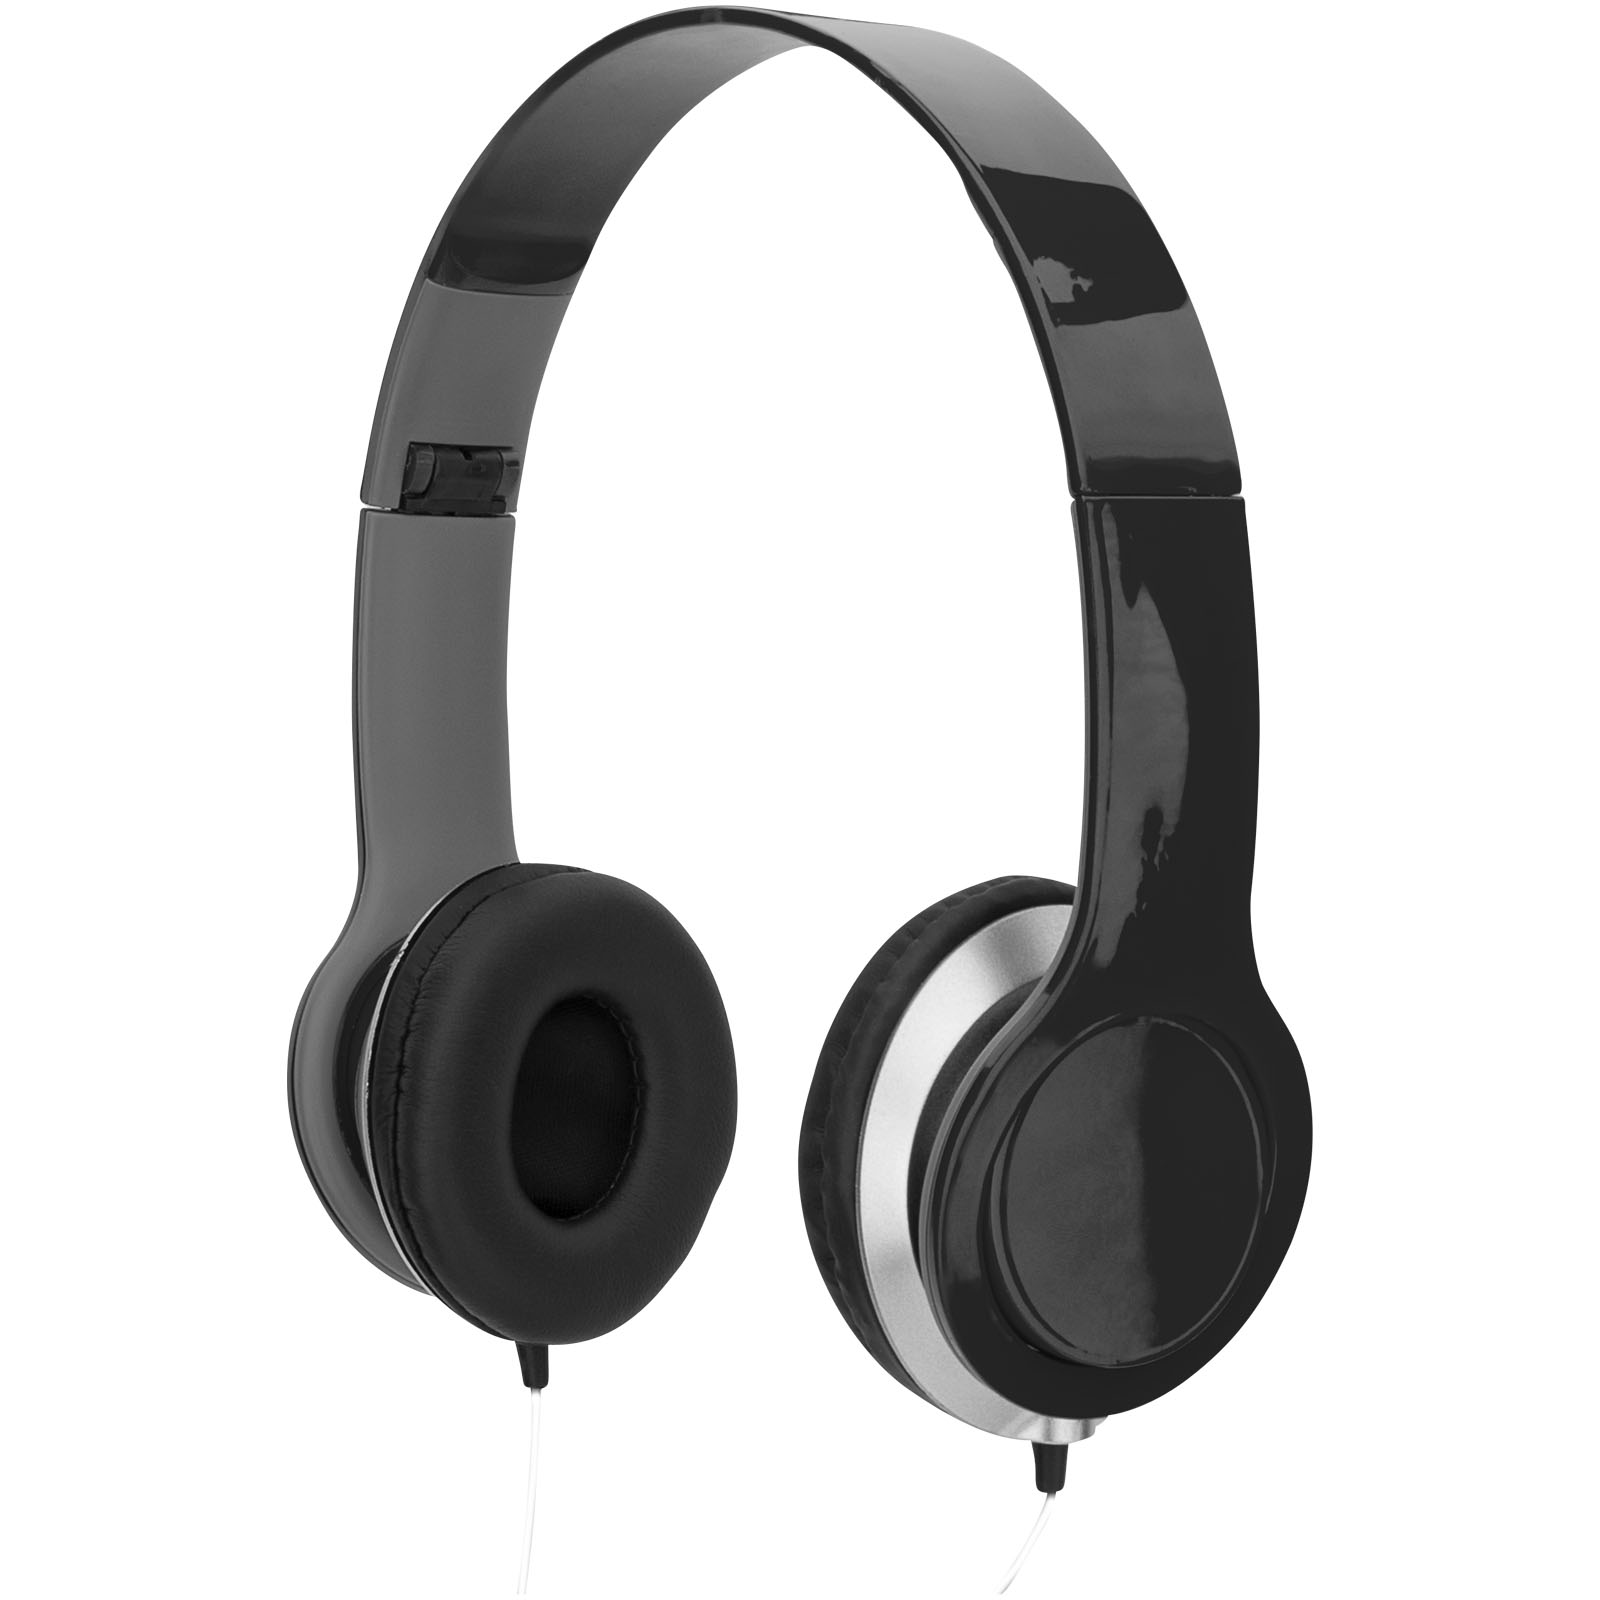 Headphones that are foldable and lightweight - Henley-in-Arden